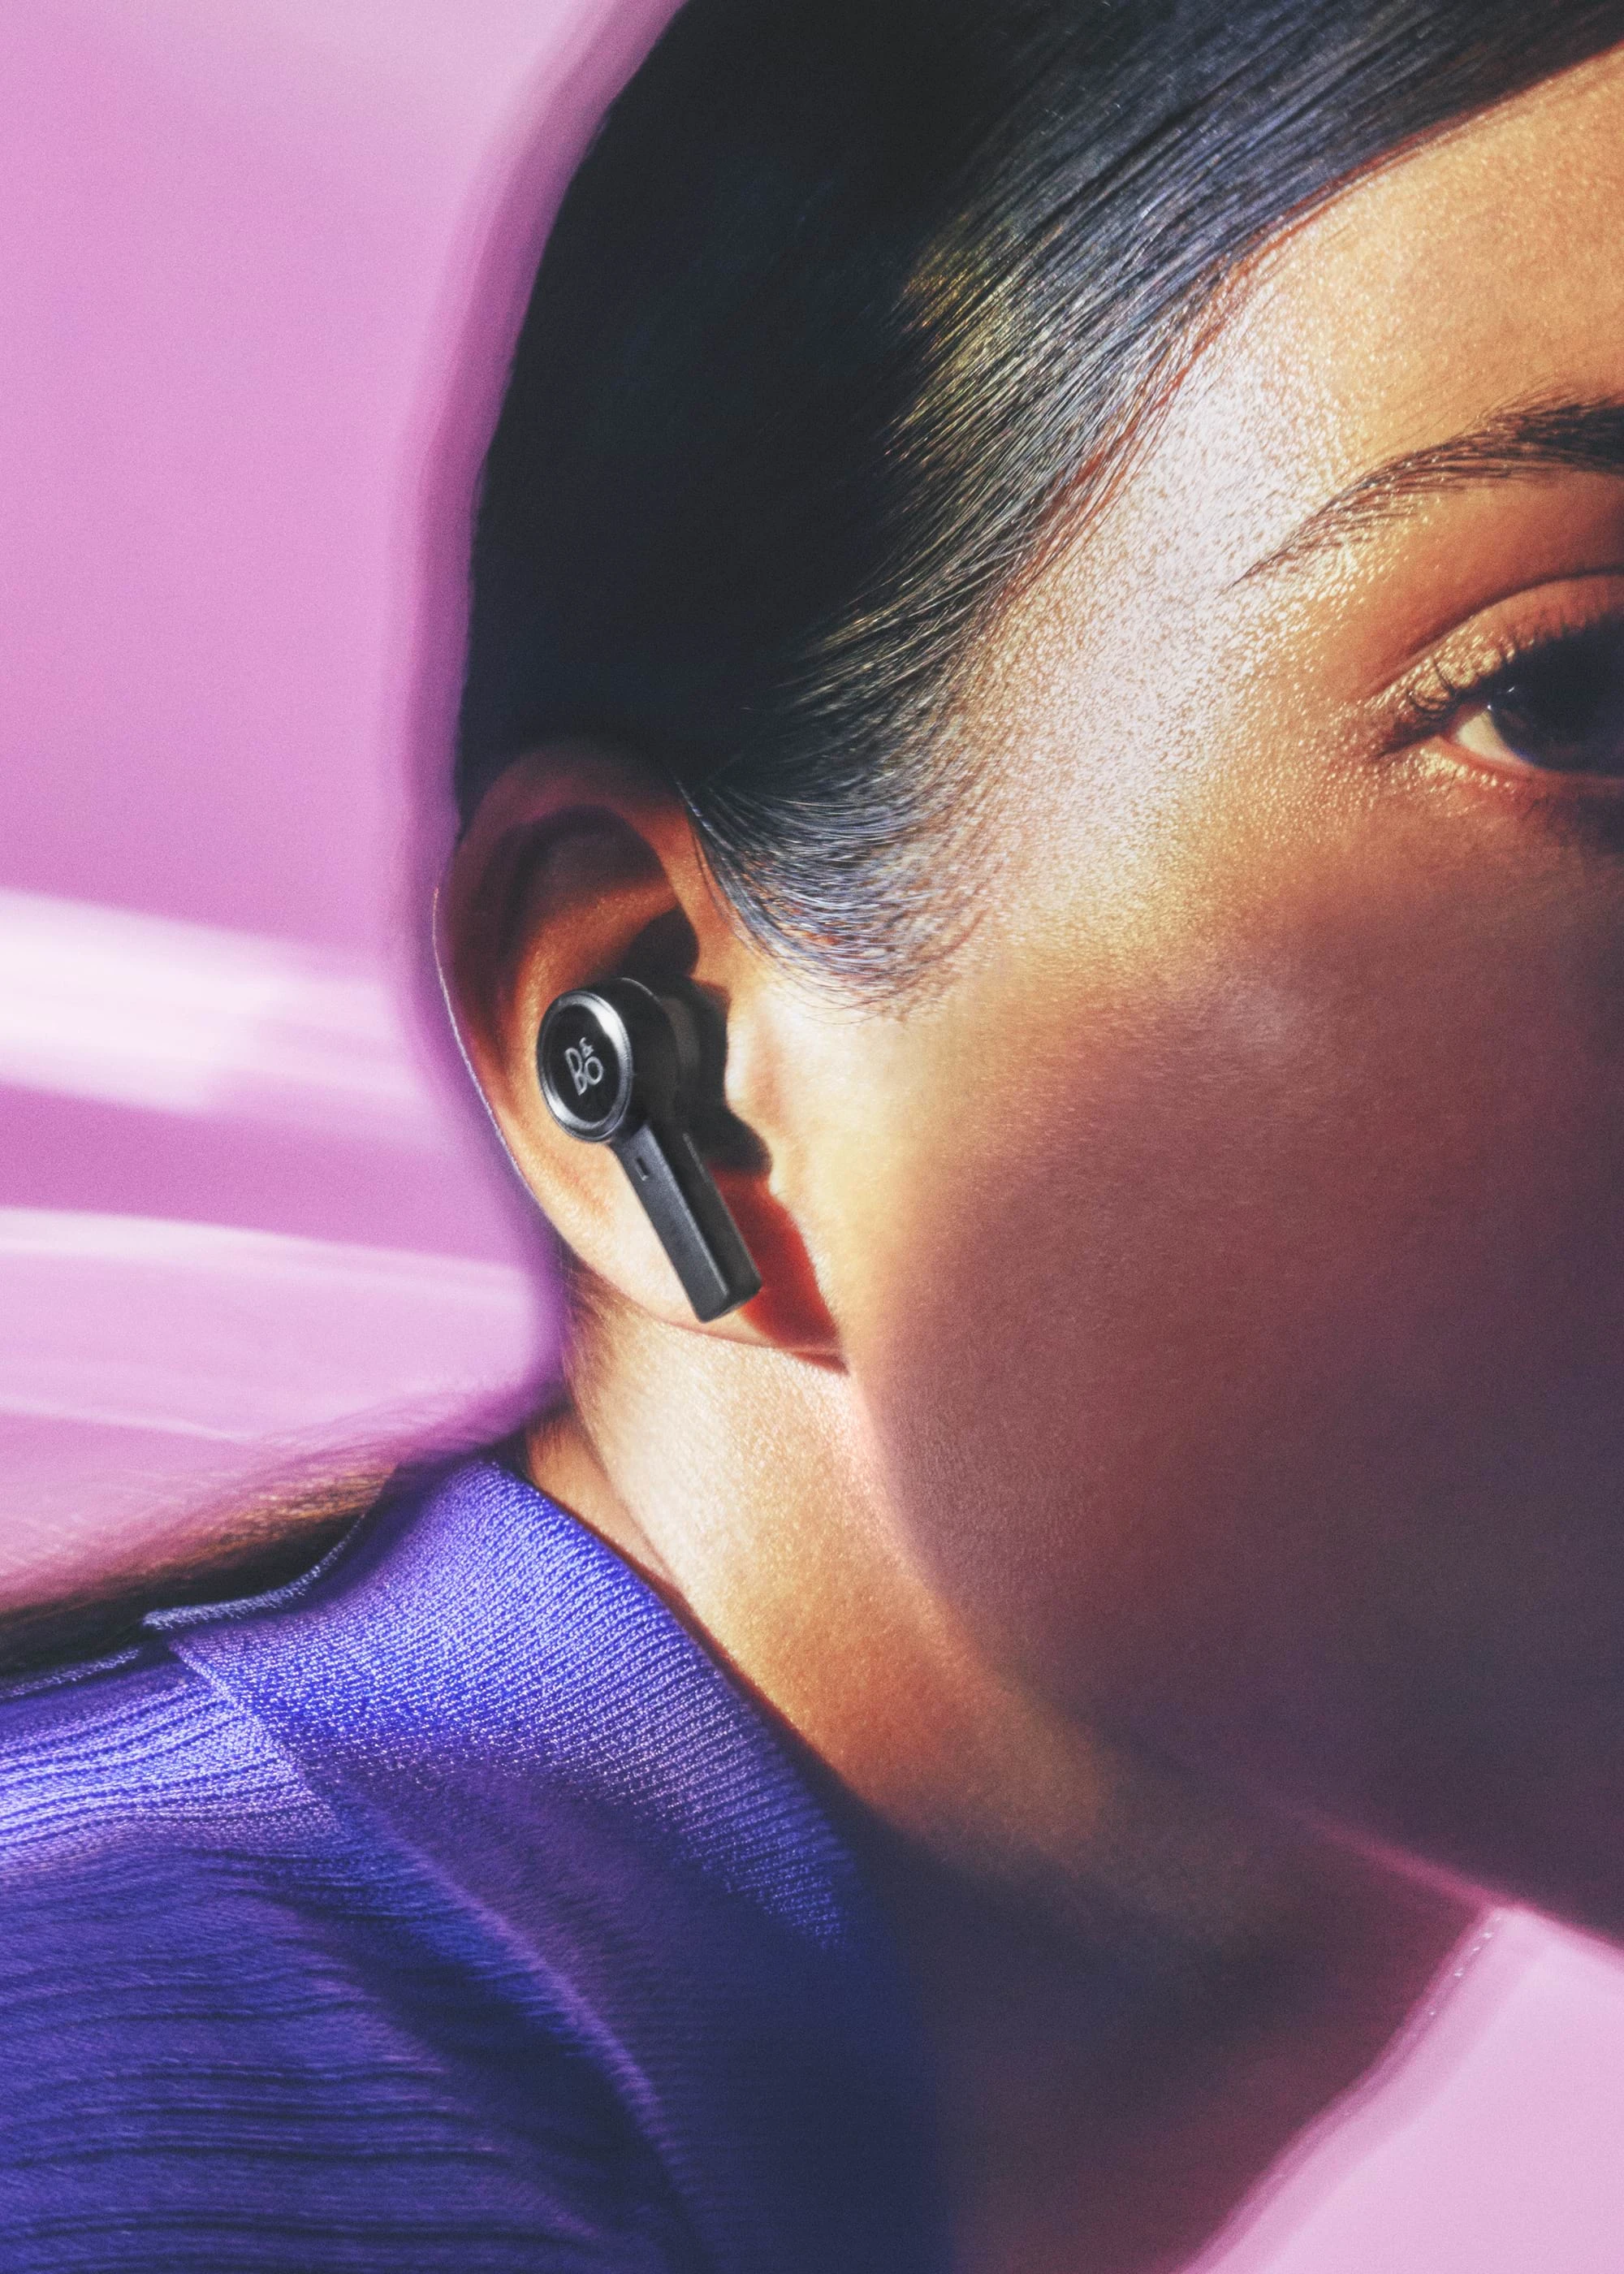 Beoplay EX in shown in an ear